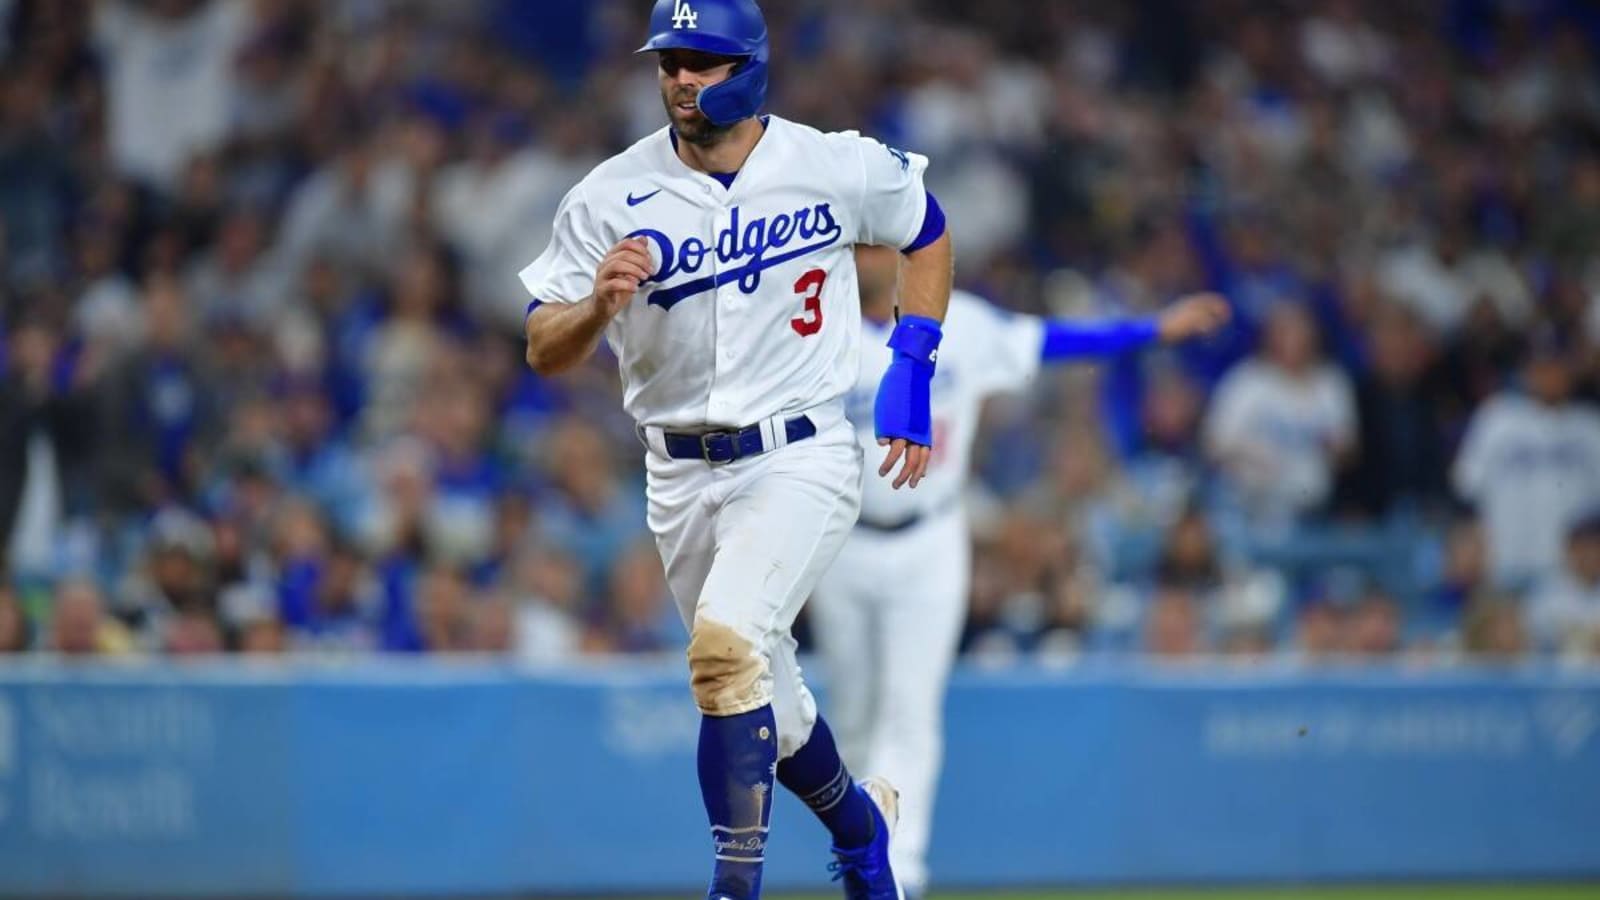  Chris Taylor Provides Heath Update as Spring Training Nears